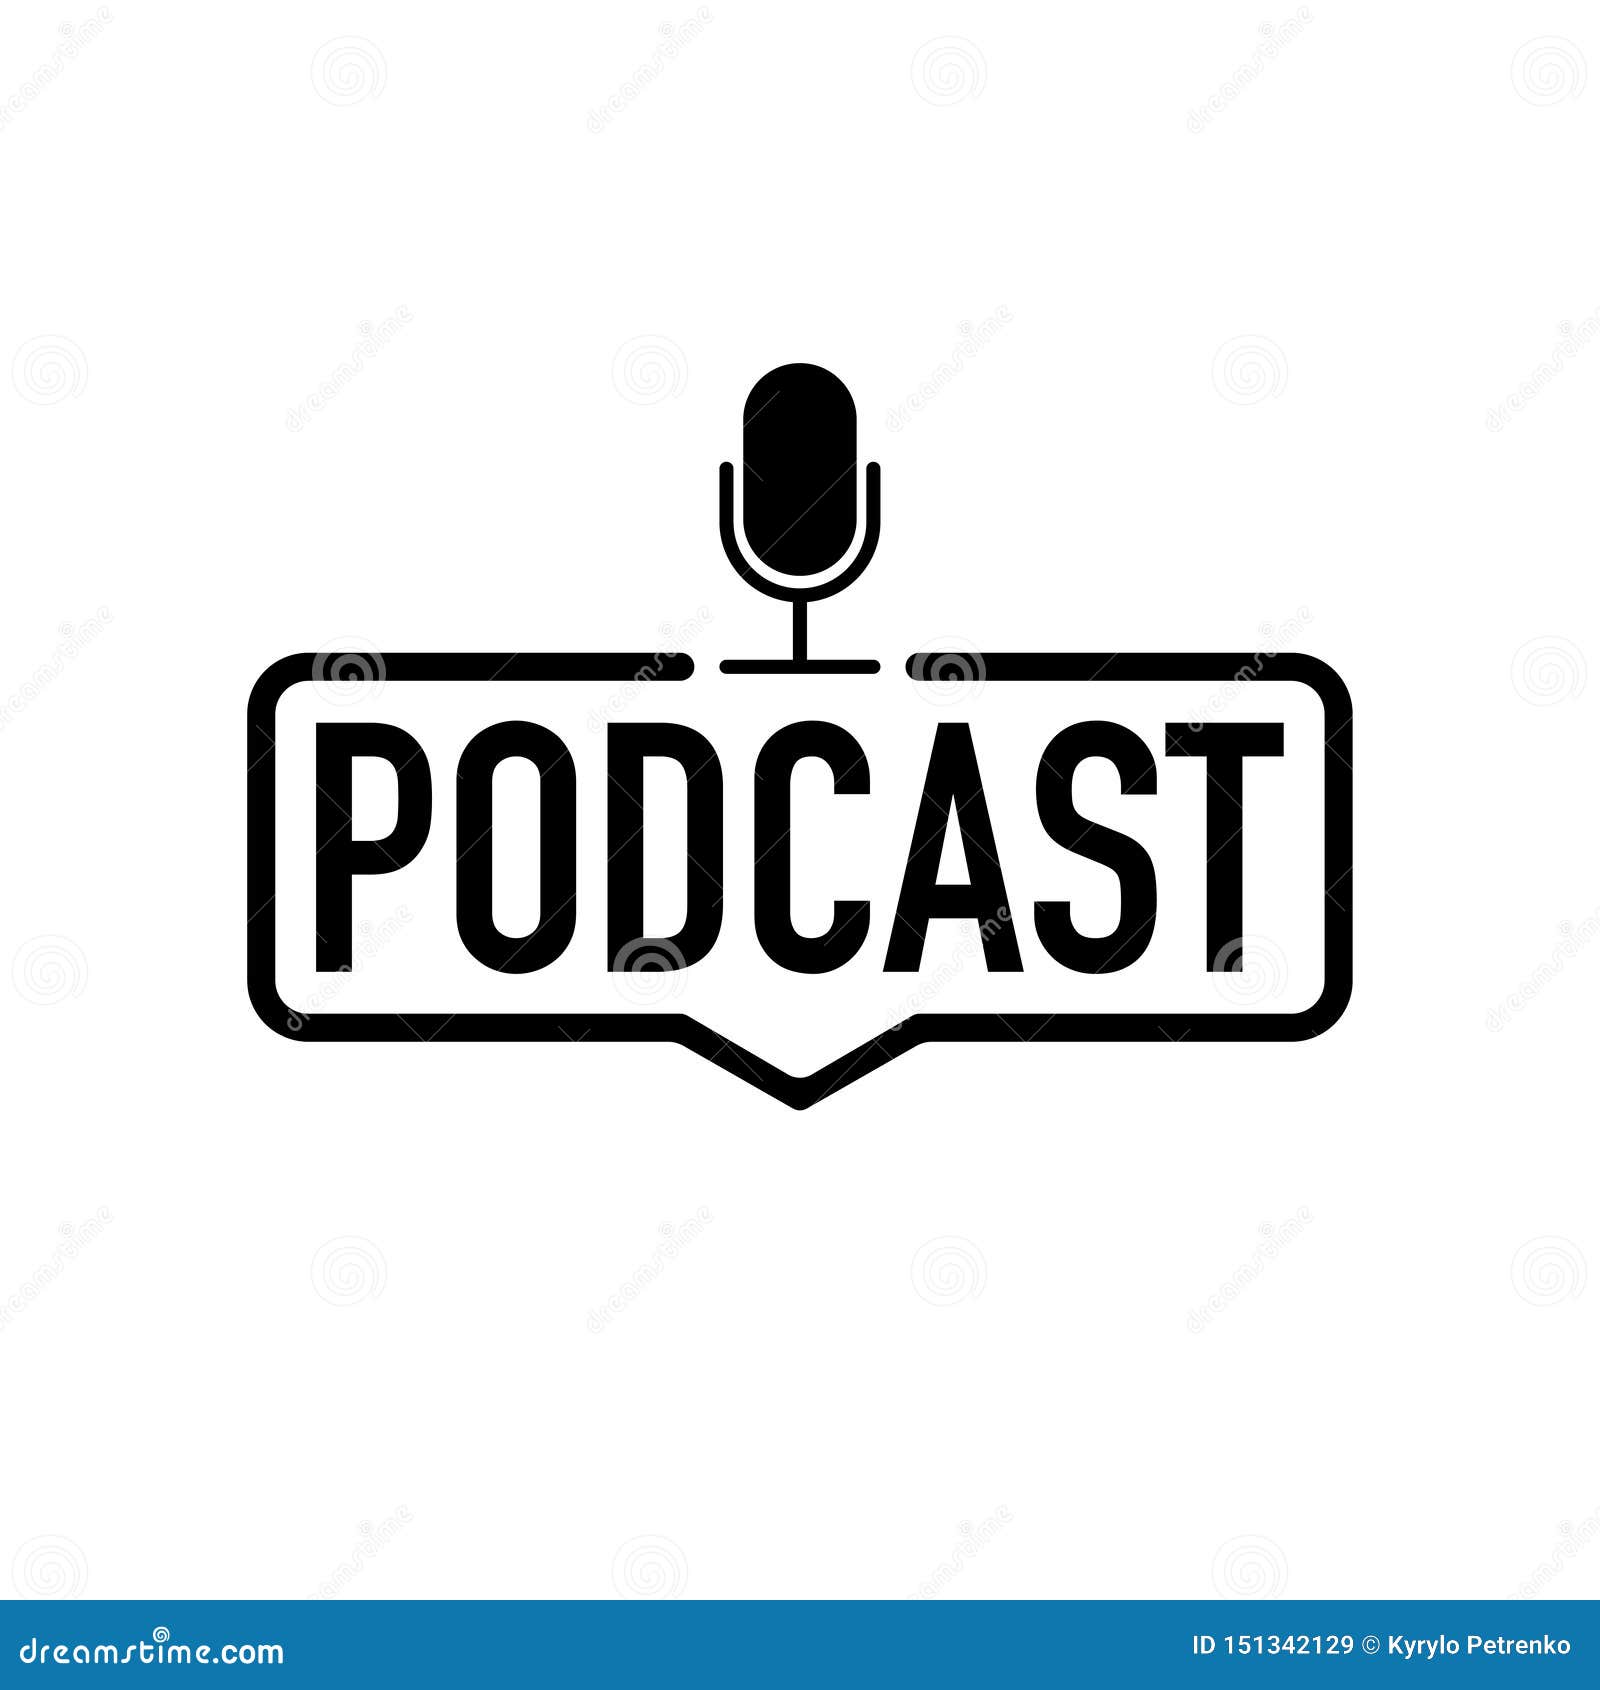 Podcast Black Icon on White Background Vector Stock Vector ...